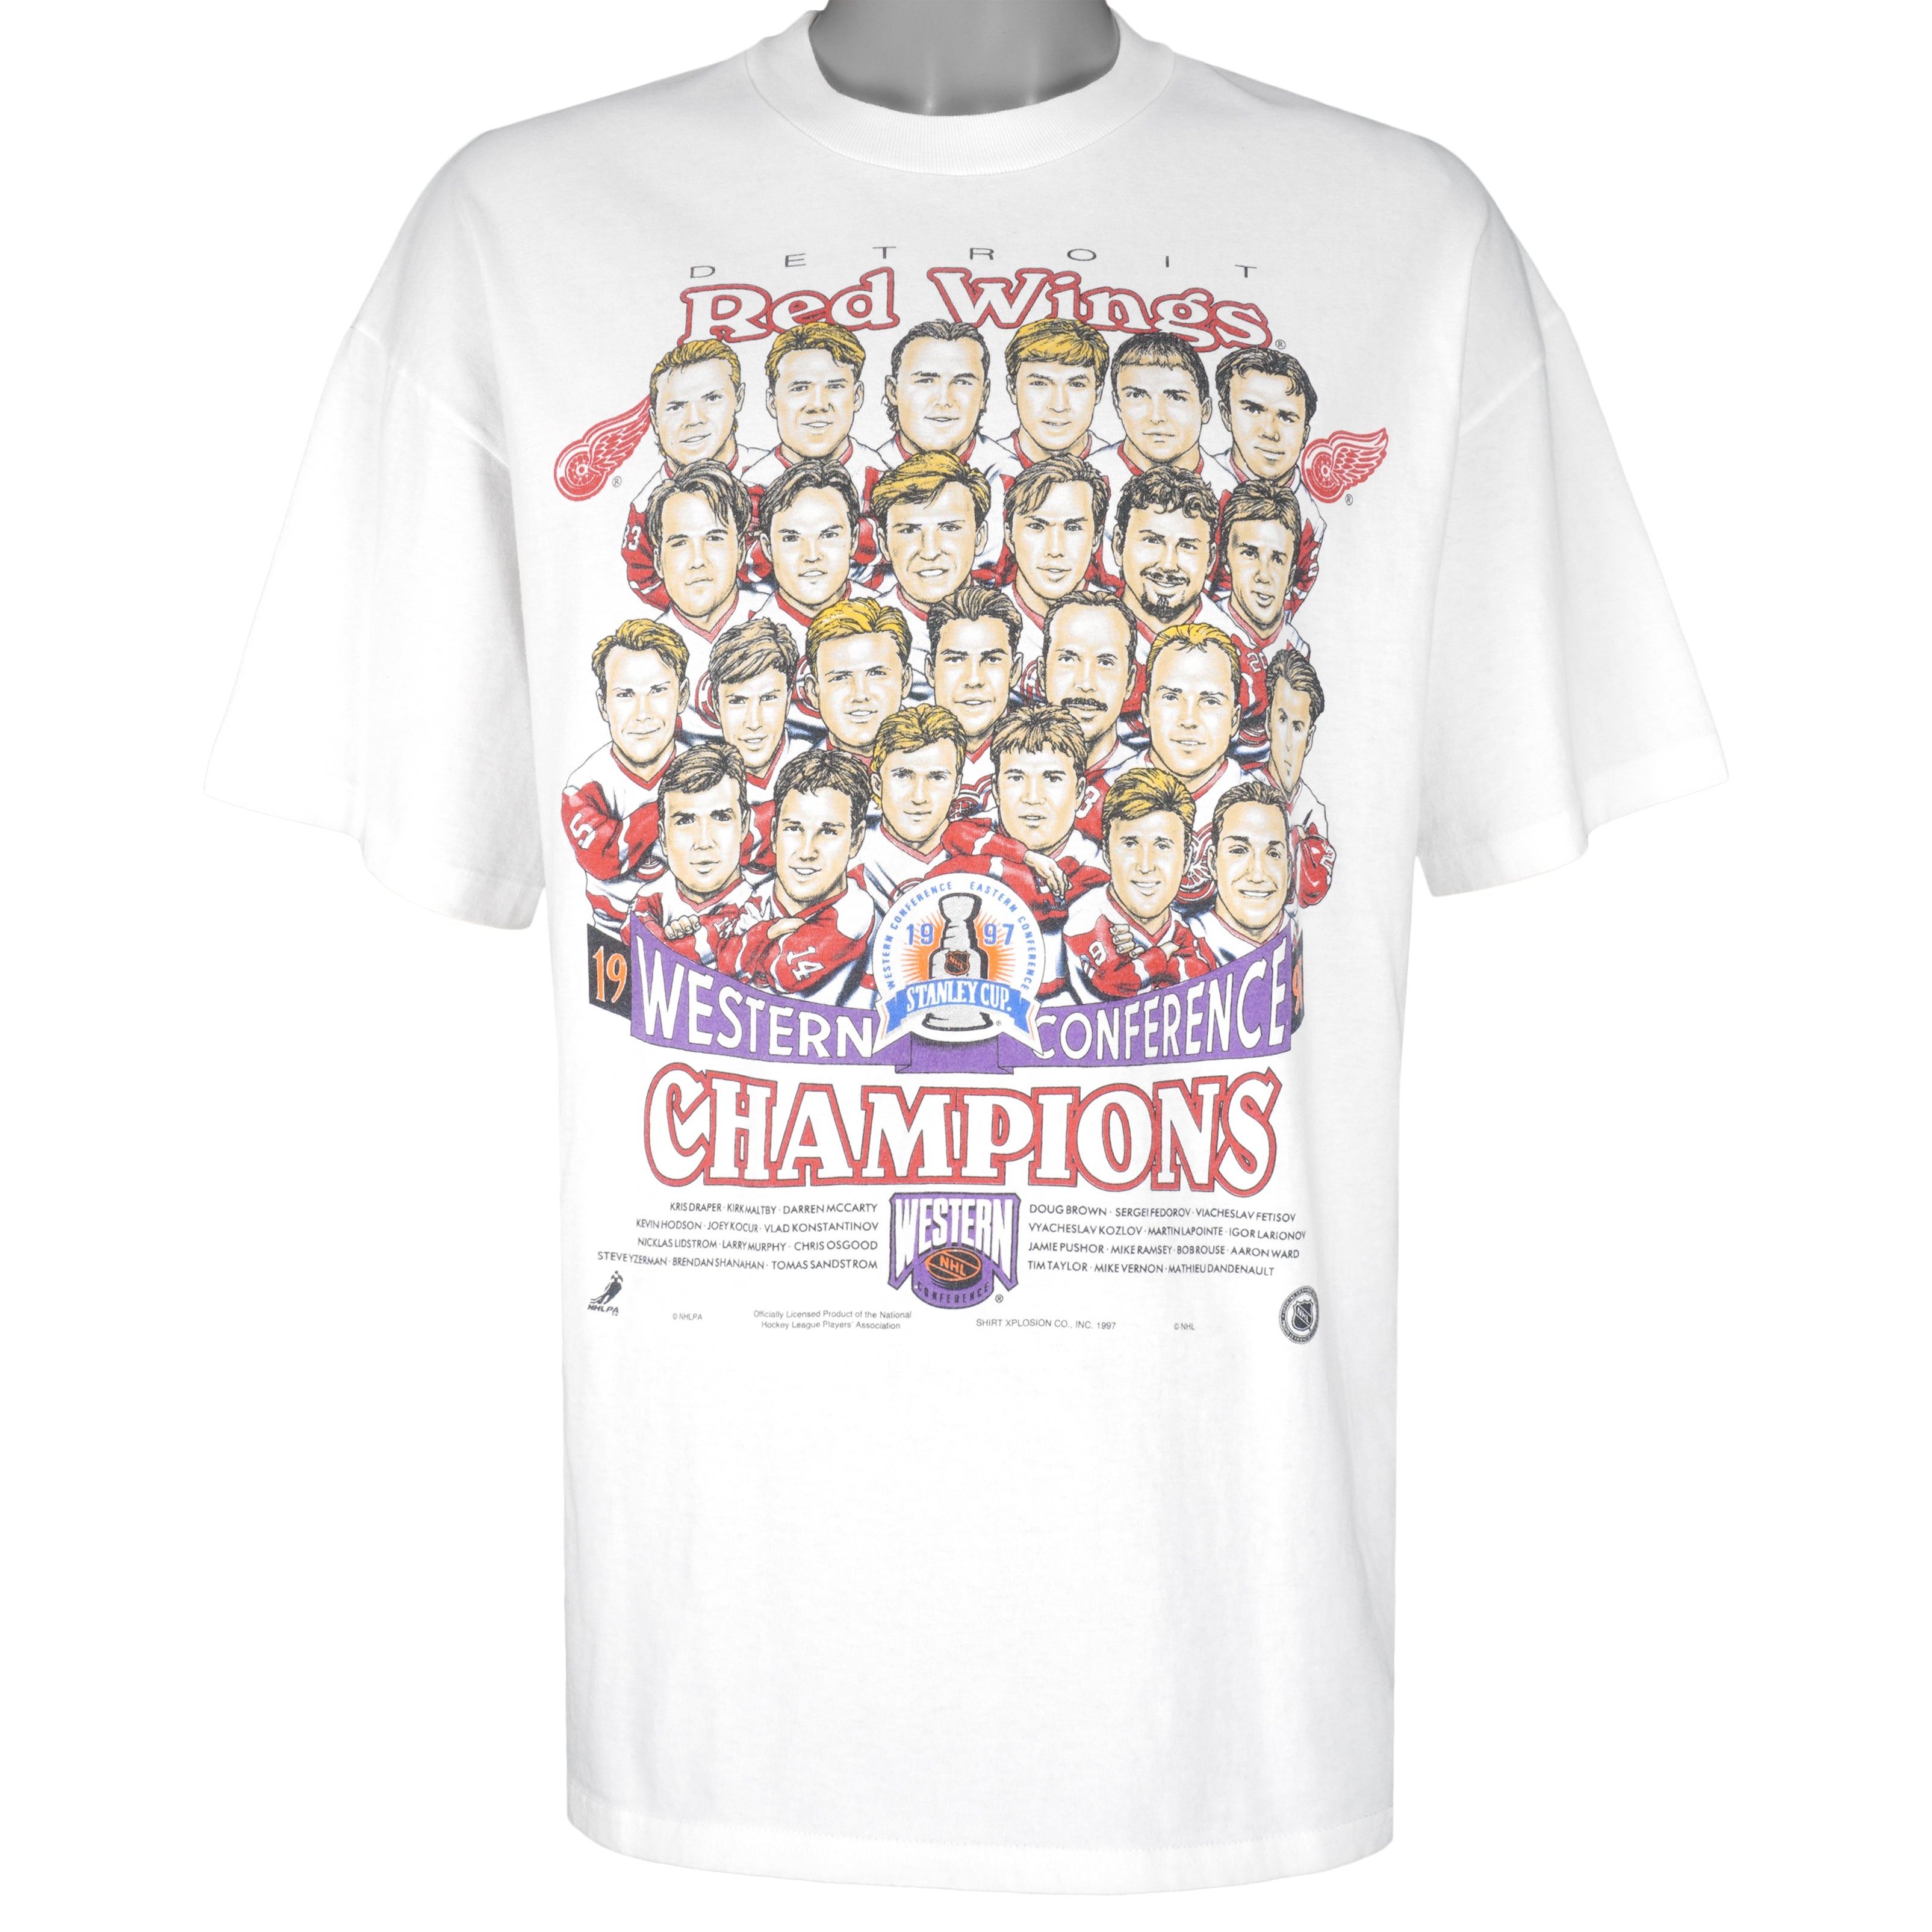 Vintage Detroit Red Wings 1997/1998 Stanley Cup Champions T-Shirt Size XXL